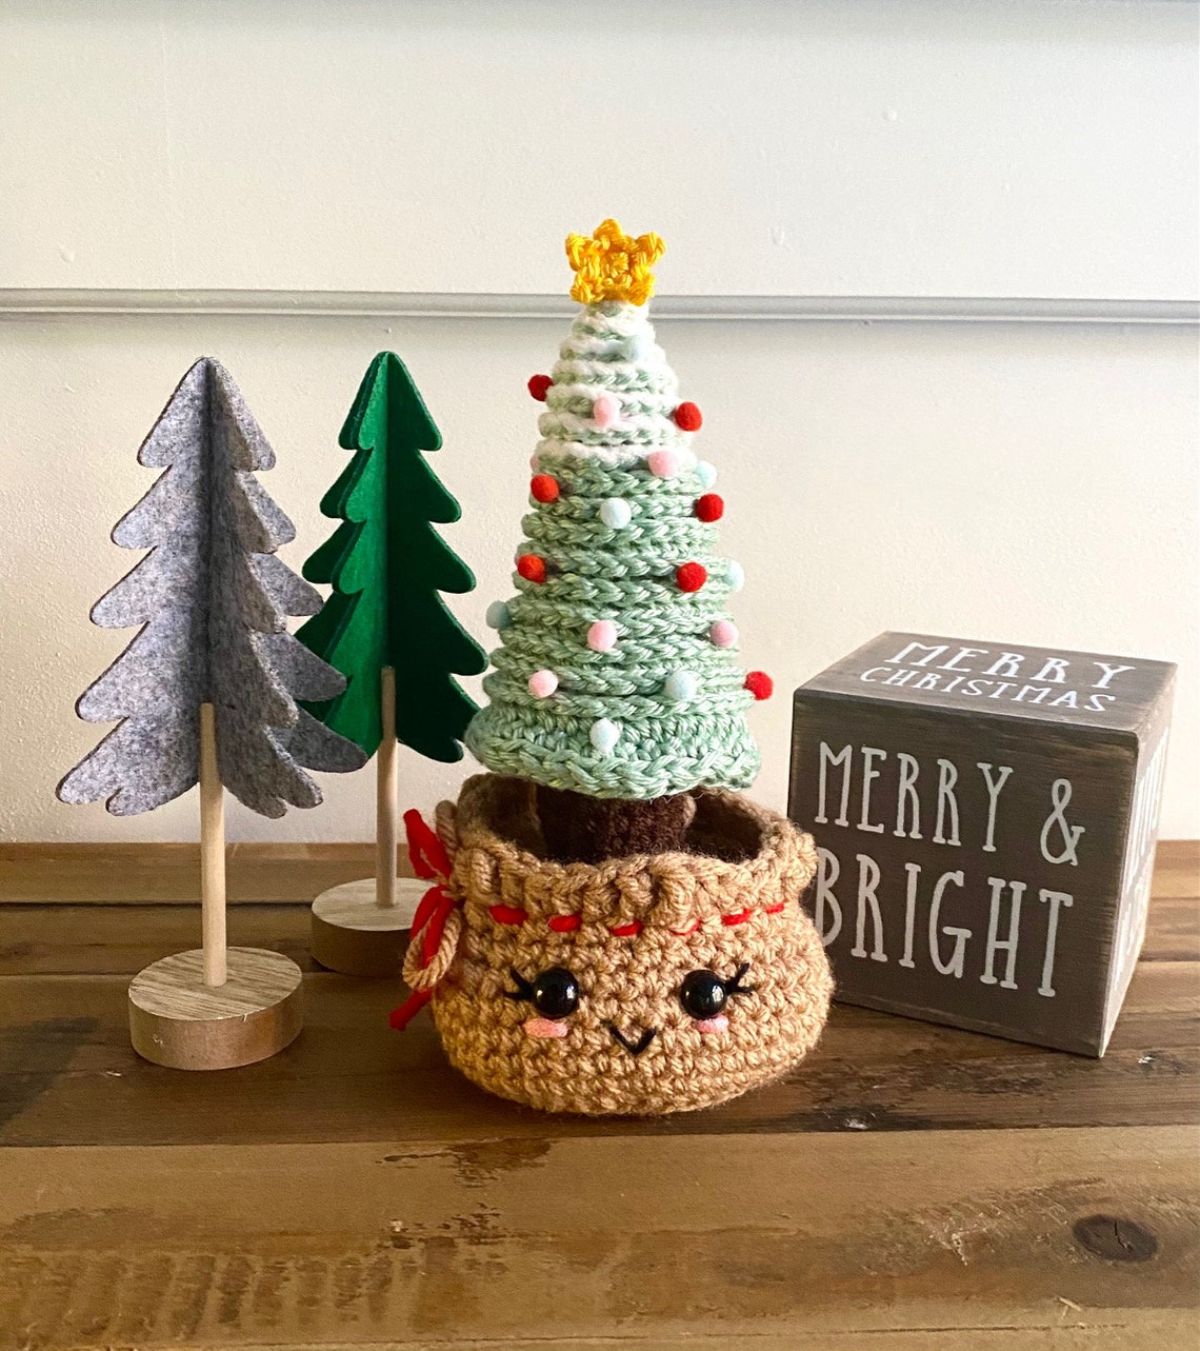 A small green and white Christmas tree with red and white bobbles on and a star on top sitting in a burlap style sack.